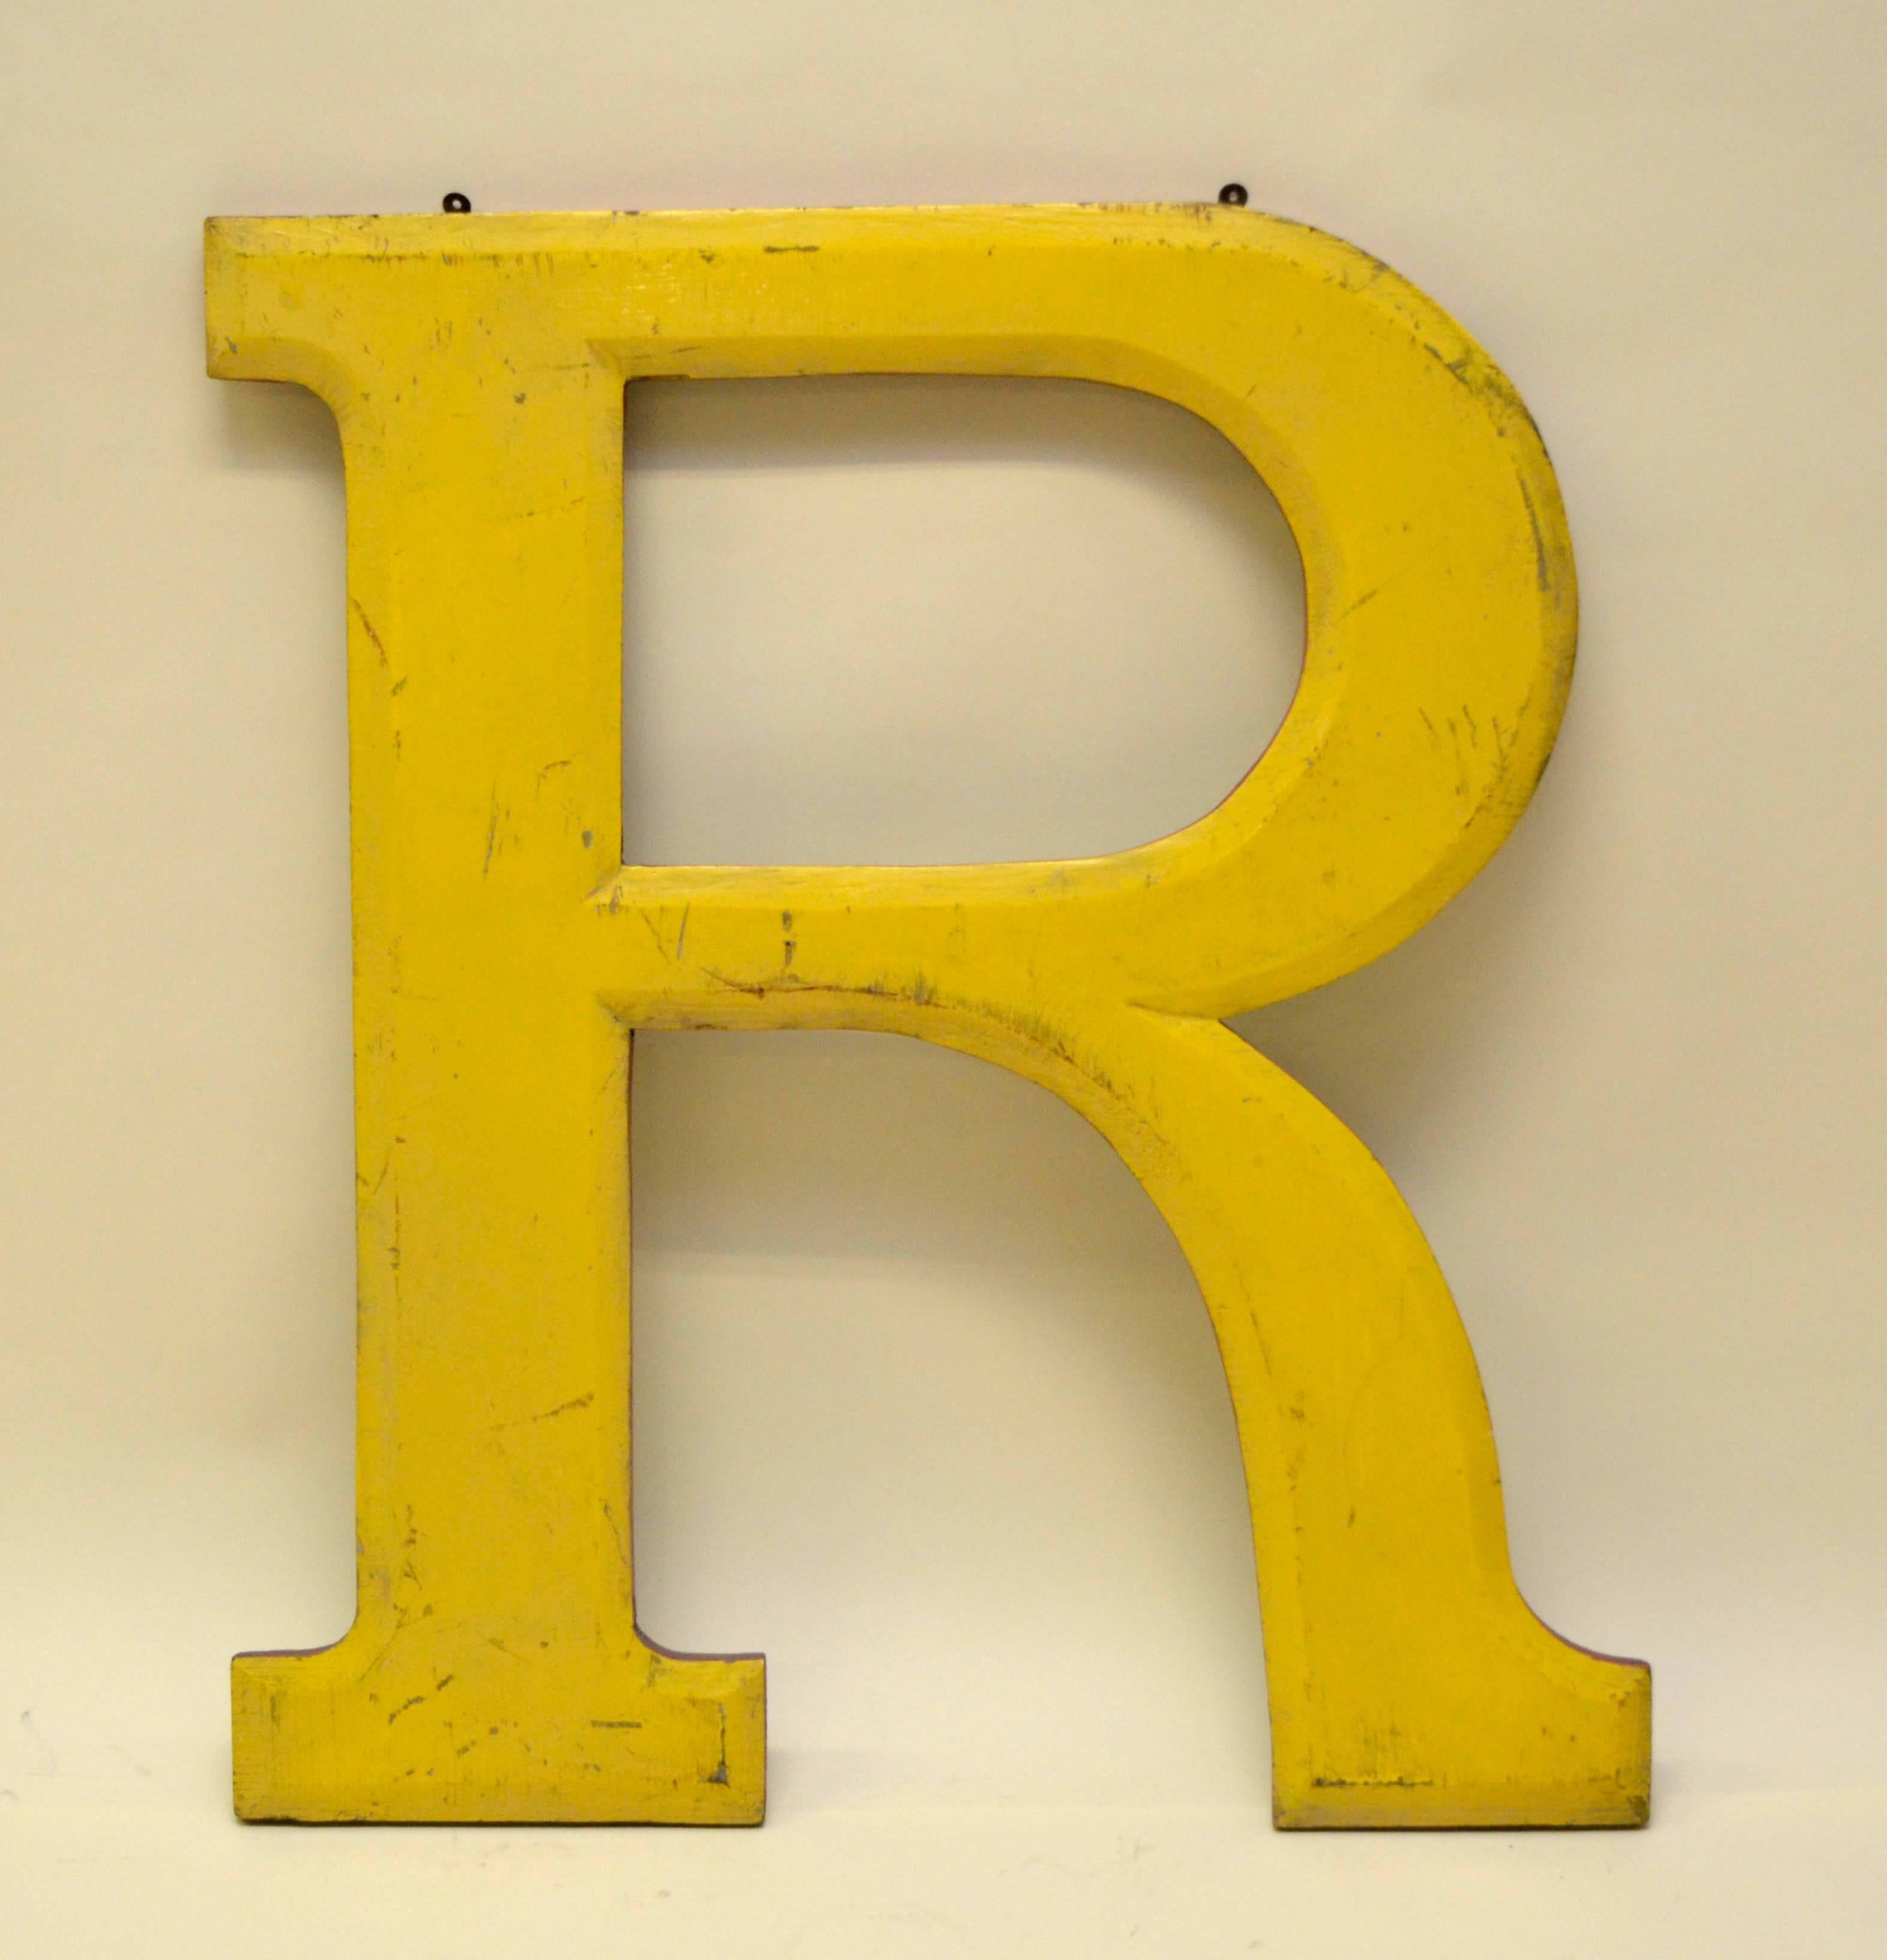 English 1960s Very Large Yellow Wooden Capital Letter R with Red Border Made in England